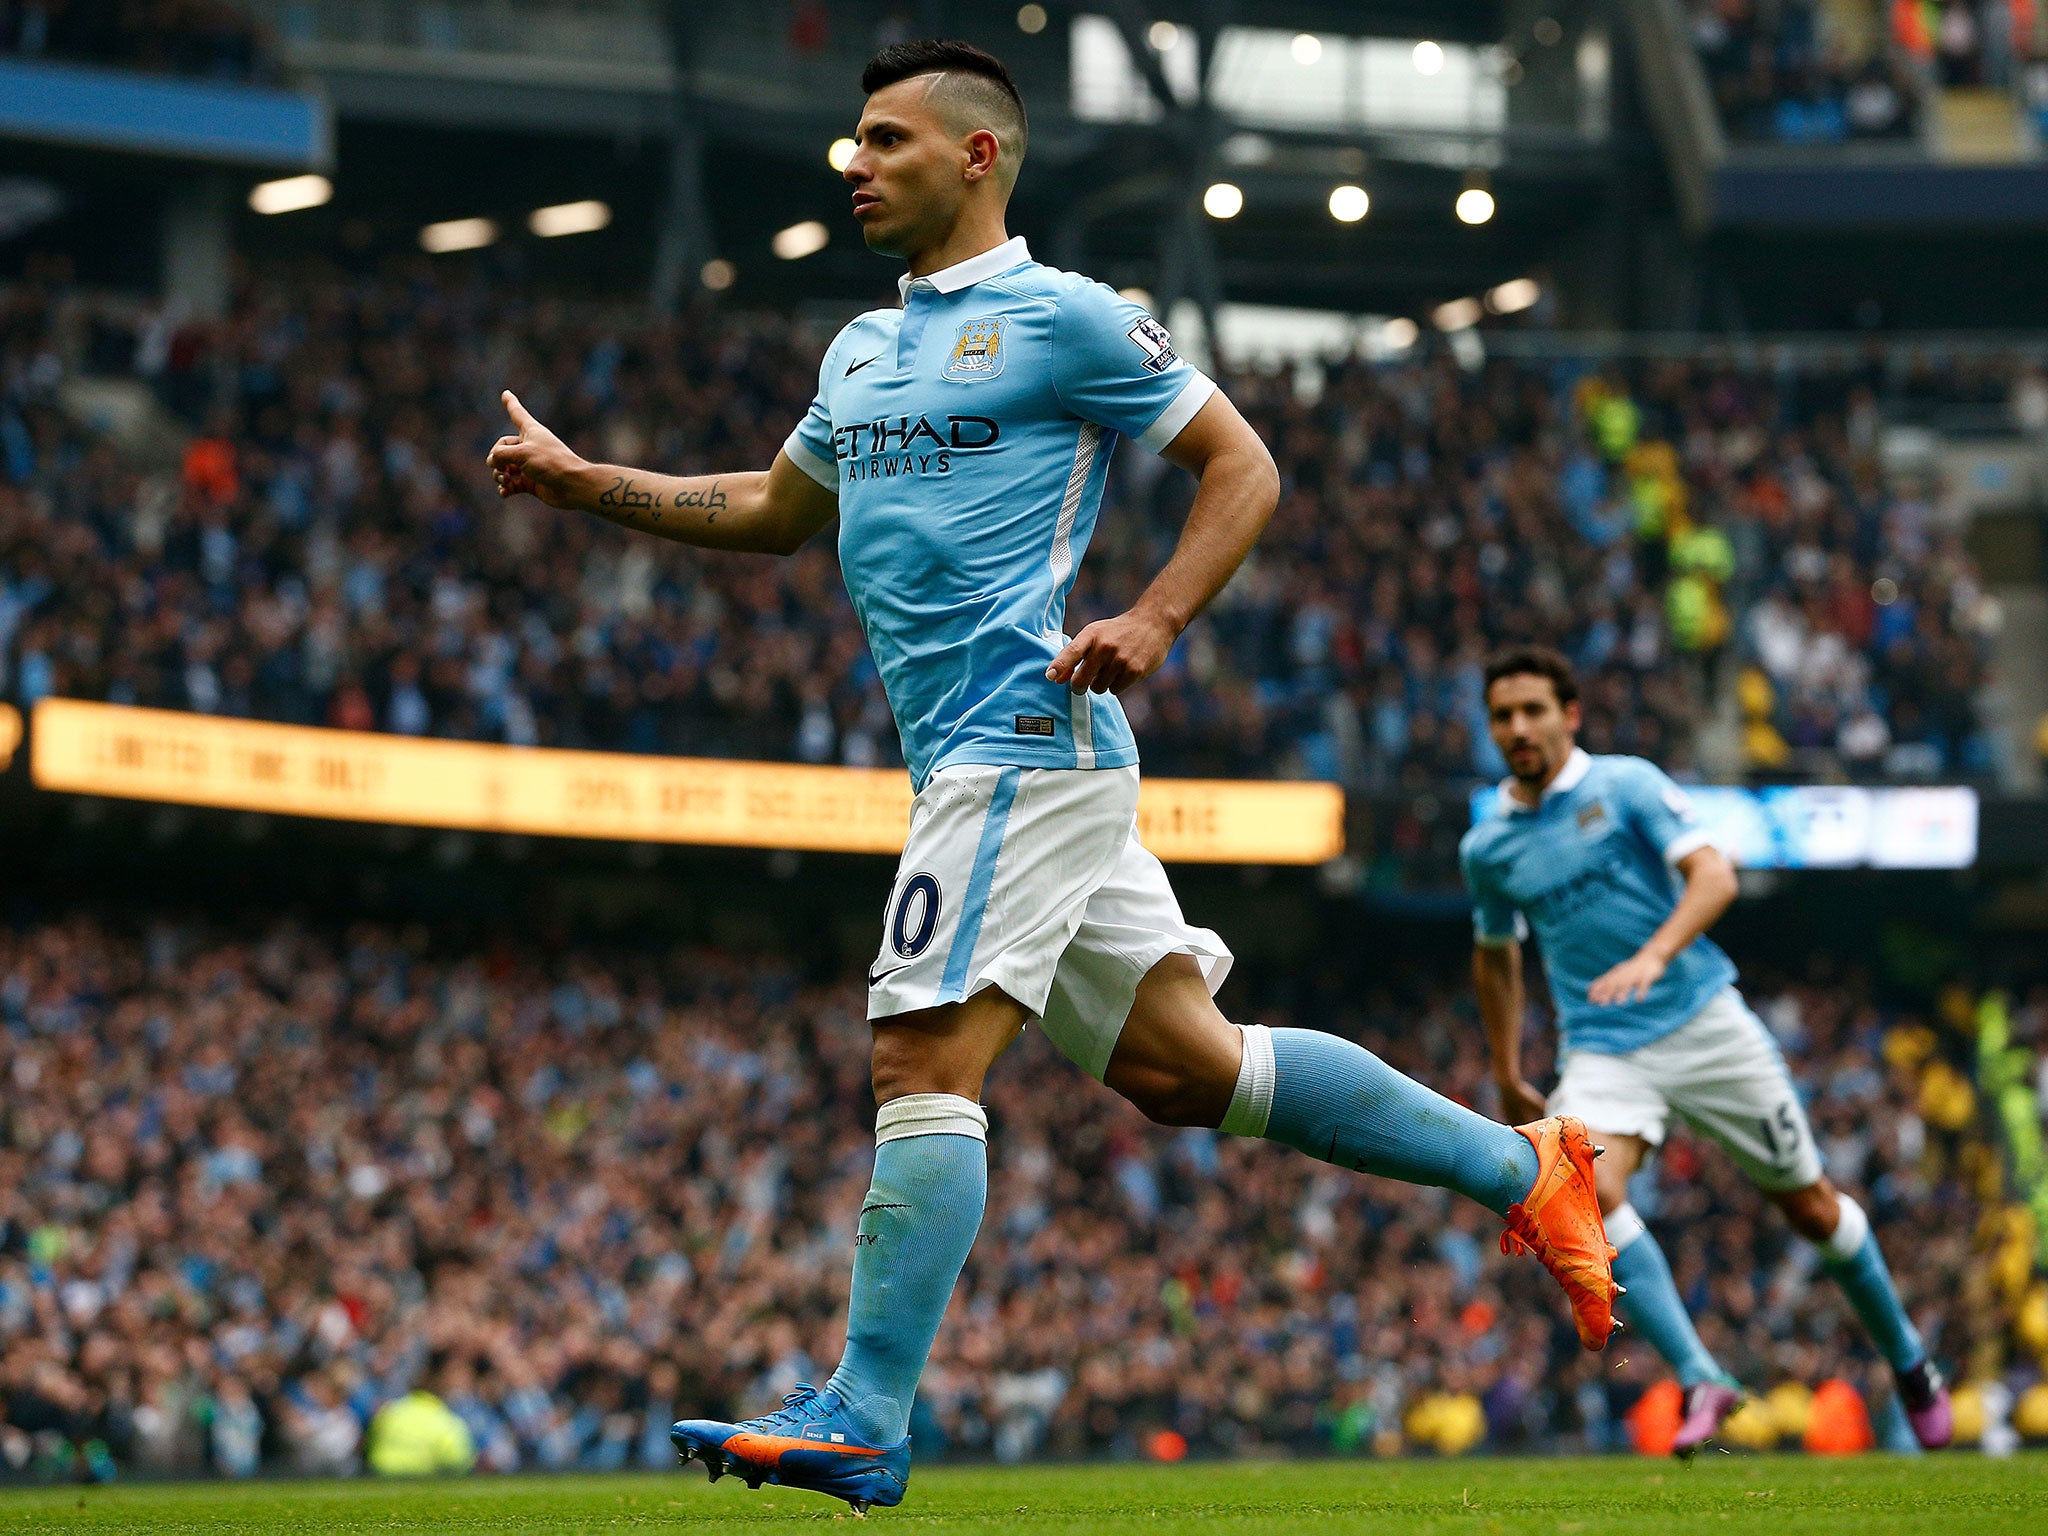 Sergio Aguero will play for City against Arsenal tonight